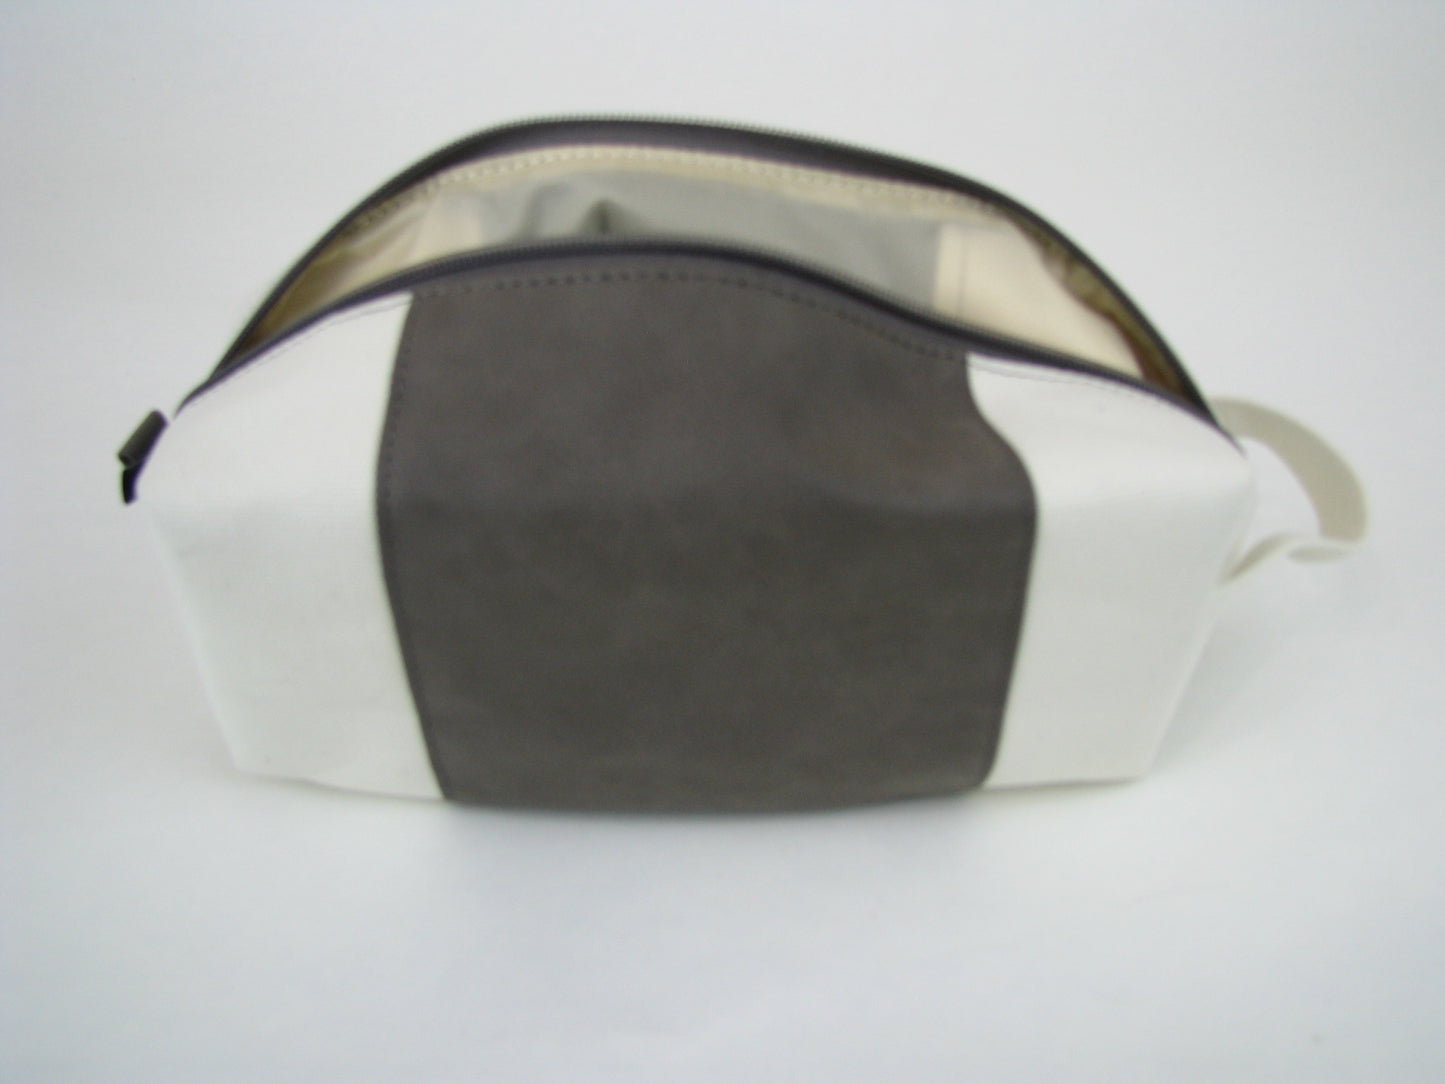 Leatherette Canvas Large Cosmetic Bag/Travel Bag